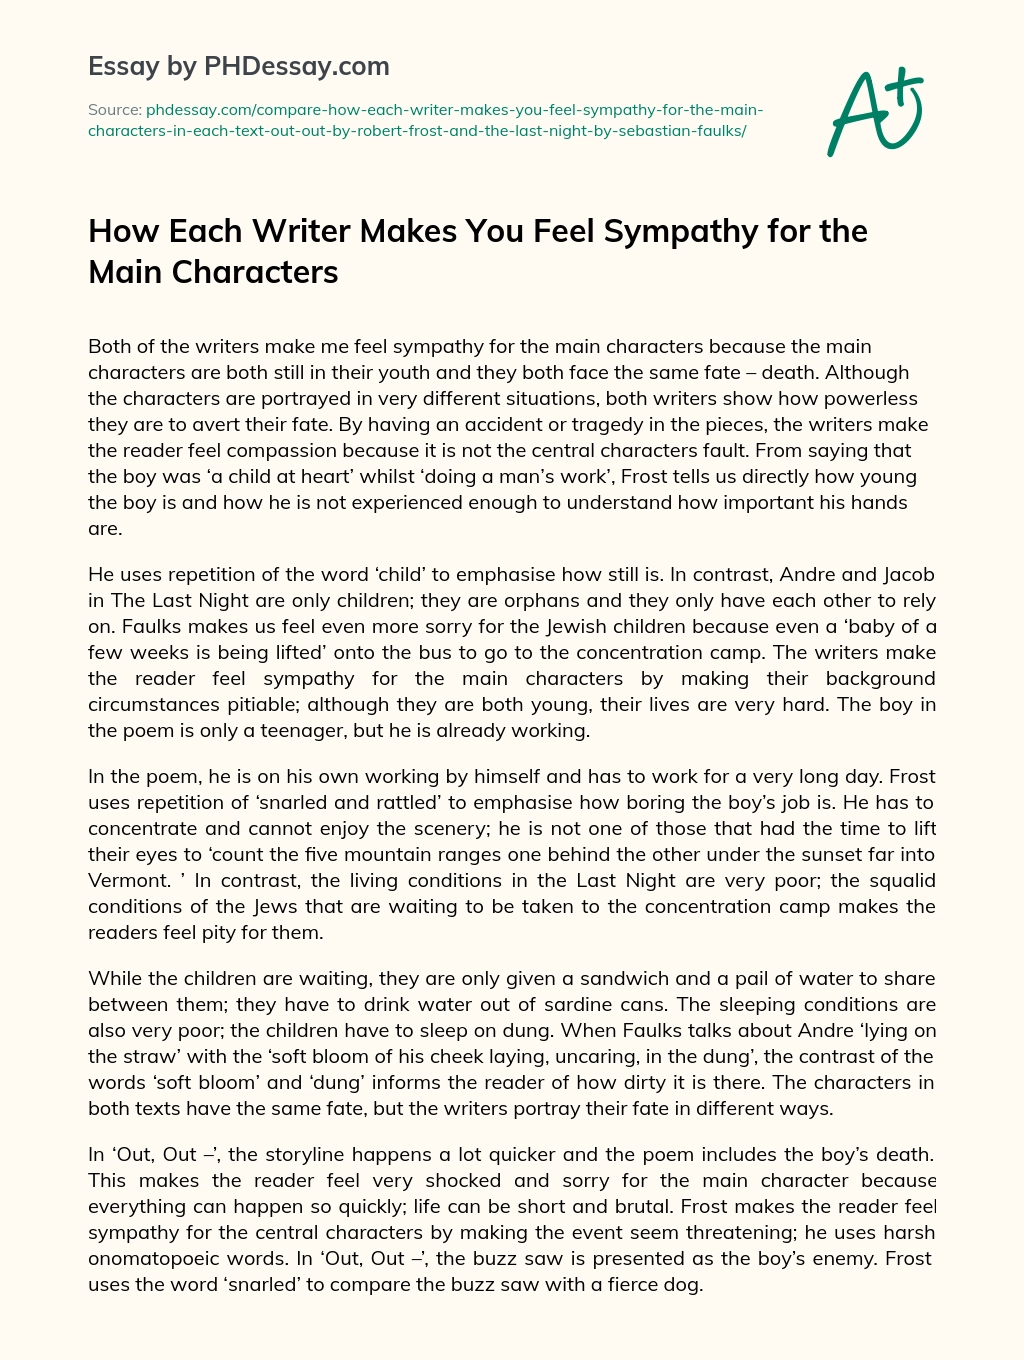 How Each Writer Makes You Feel Sympathy for the Main Characters essay